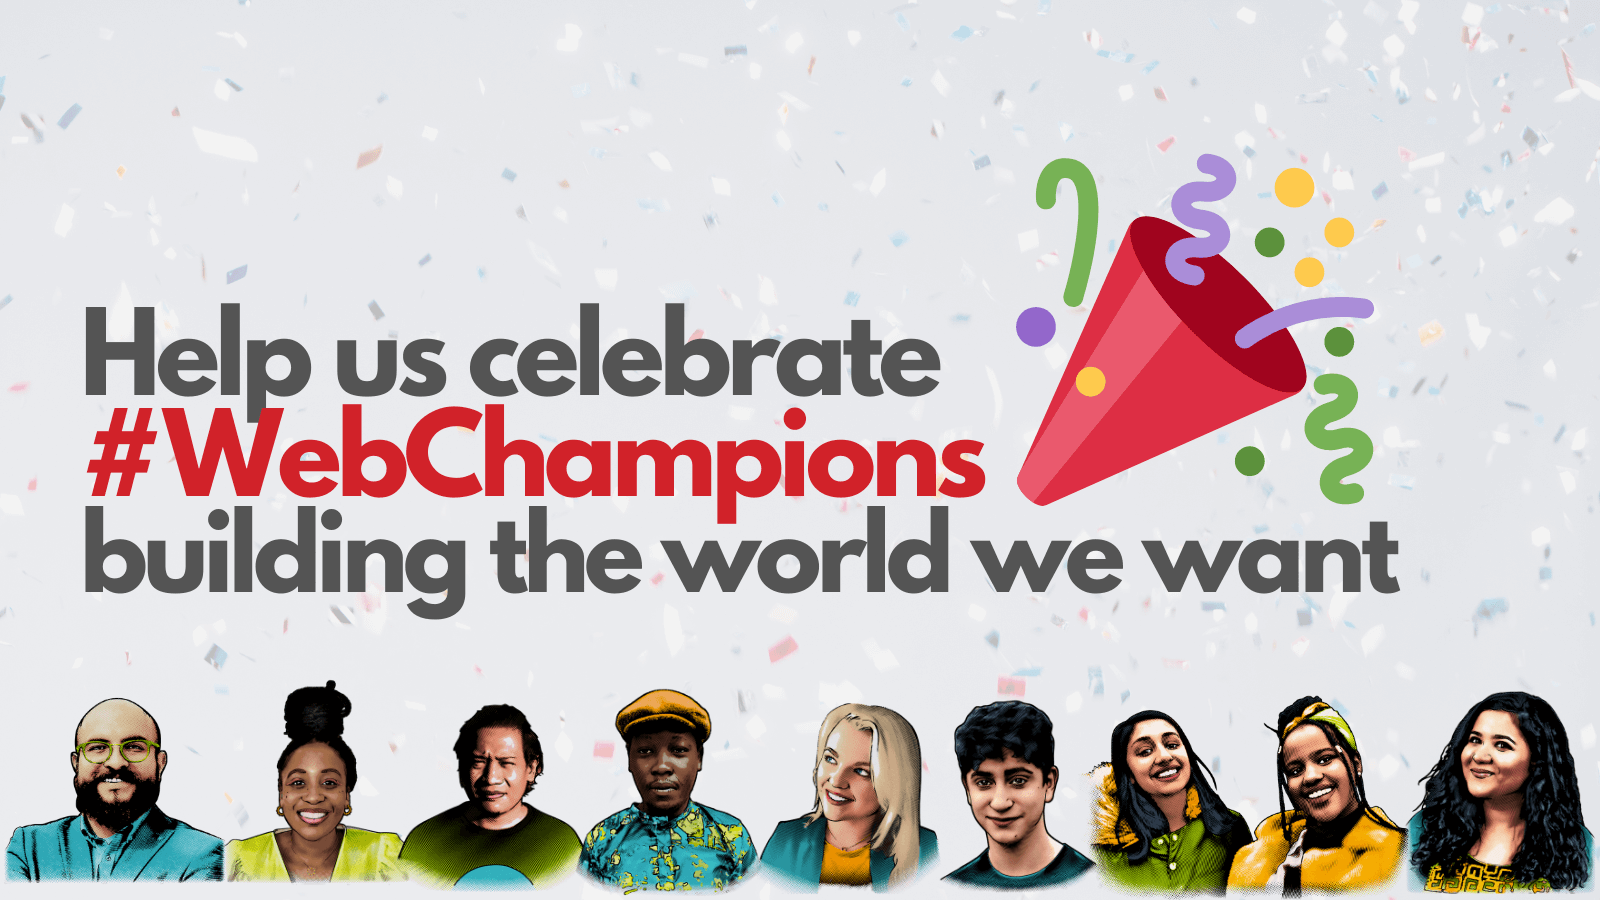 Help us celebrate #WebChampions building the world we want